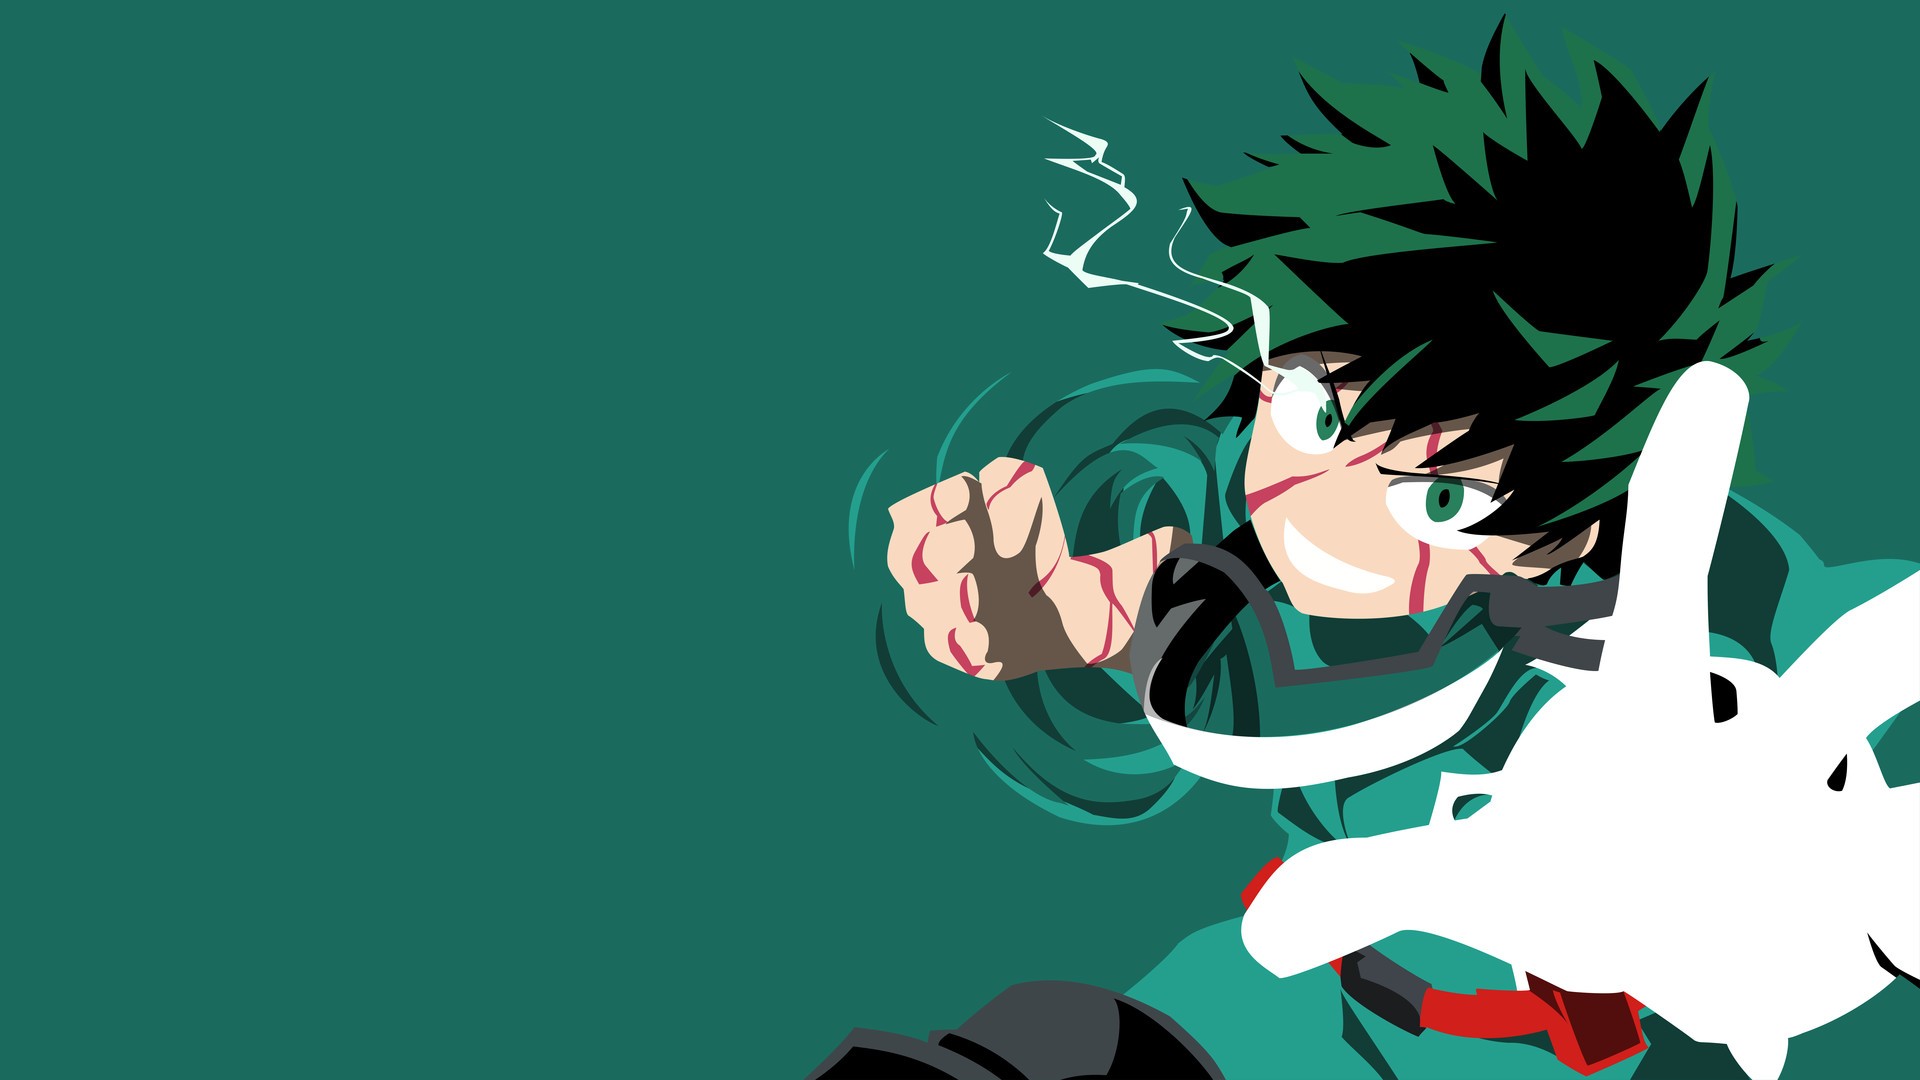 Wallpaper HD My Hero Academia with high-resolution 1920x1080 pixel. You can use this wallpaper for your Desktop Computer Backgrounds, Mac Wallpapers, Android Lock screen or iPhone Screensavers and another smartphone device